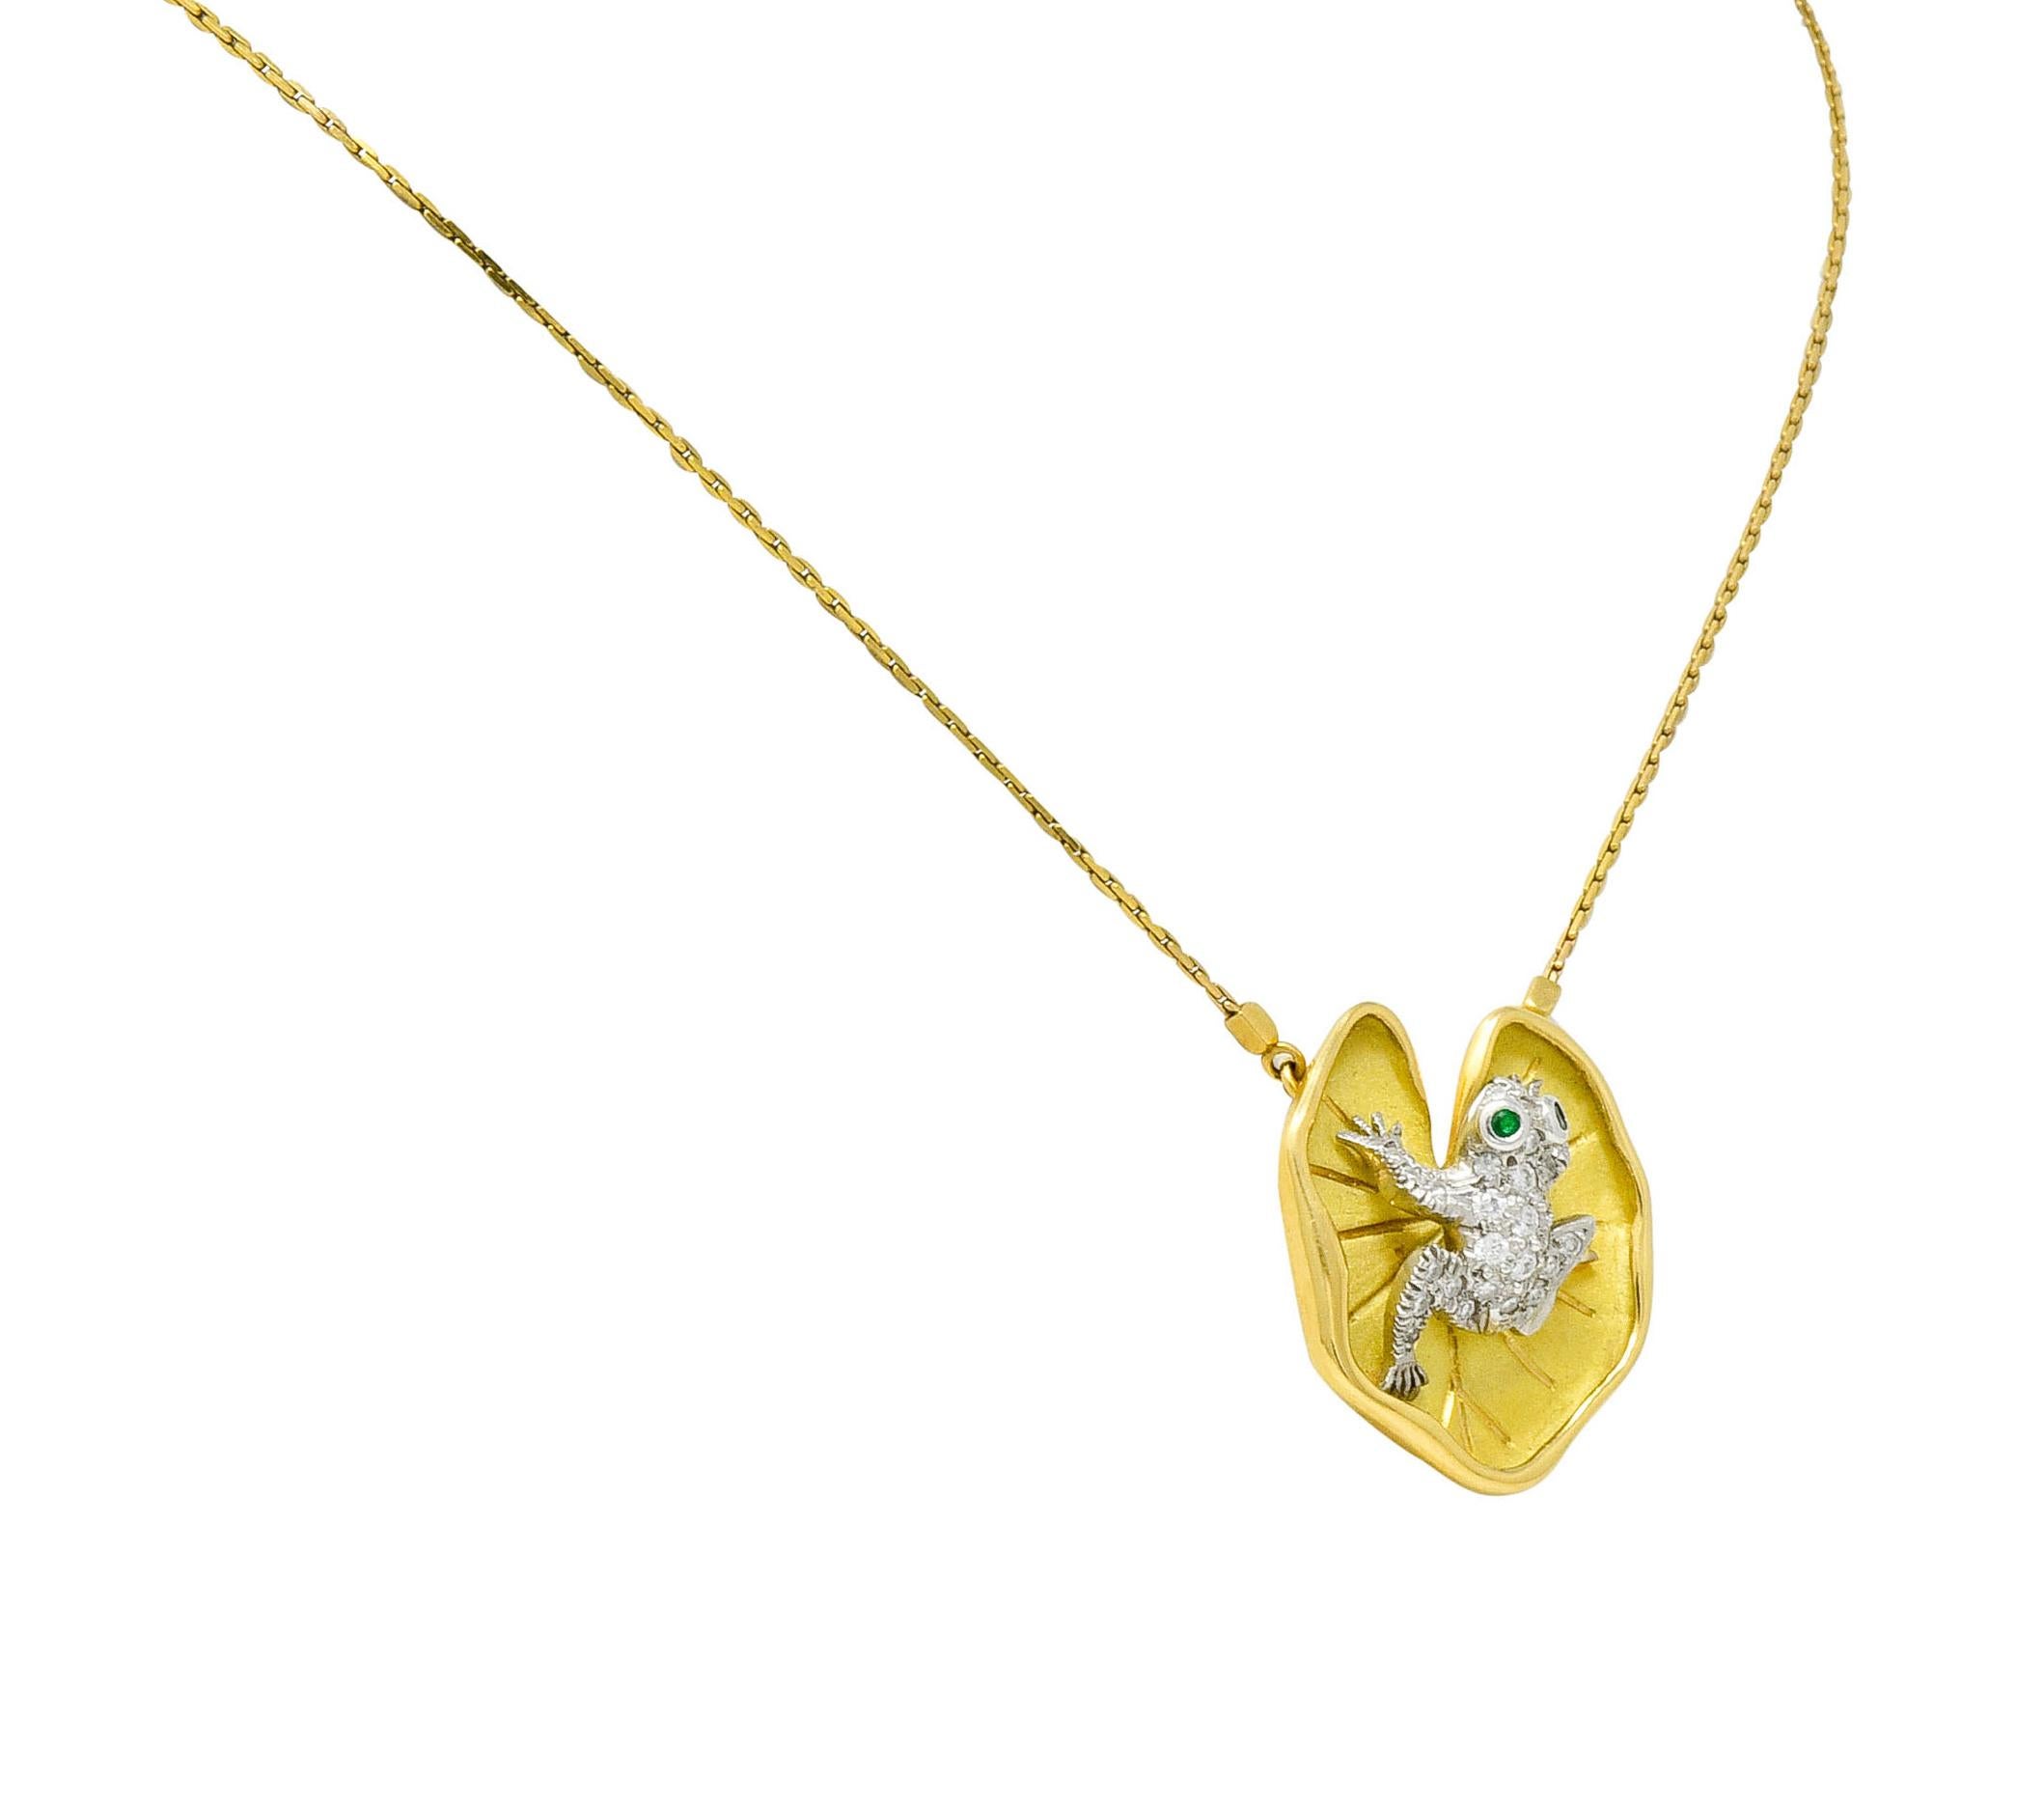 lily pad necklace